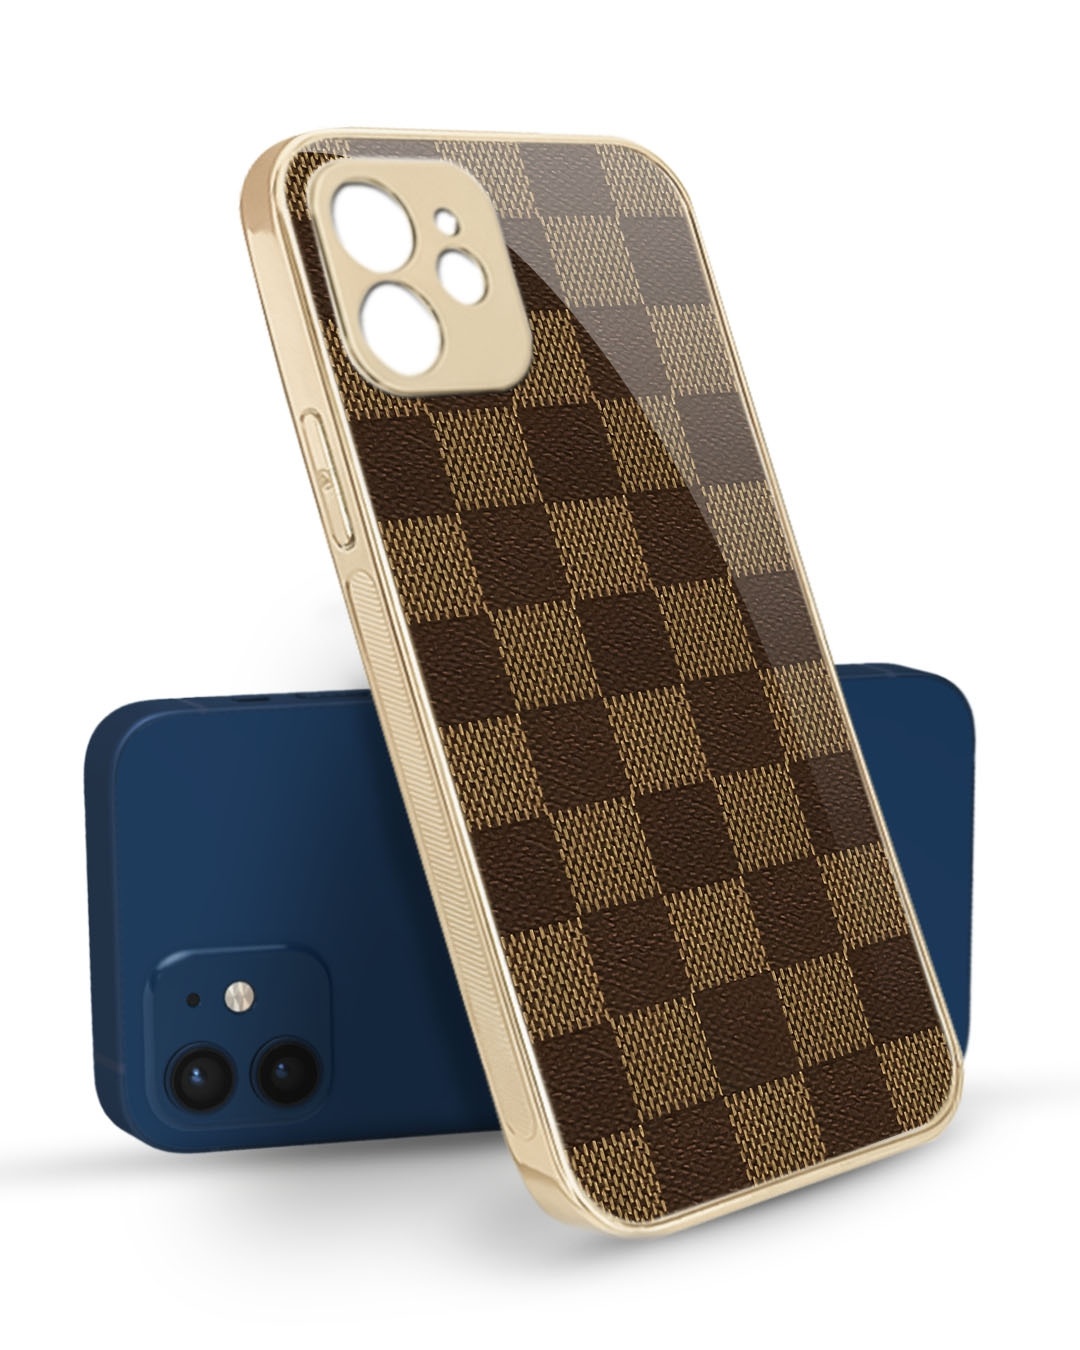 Buy LV Black Gold Glass Case for iPhone 12 Pro